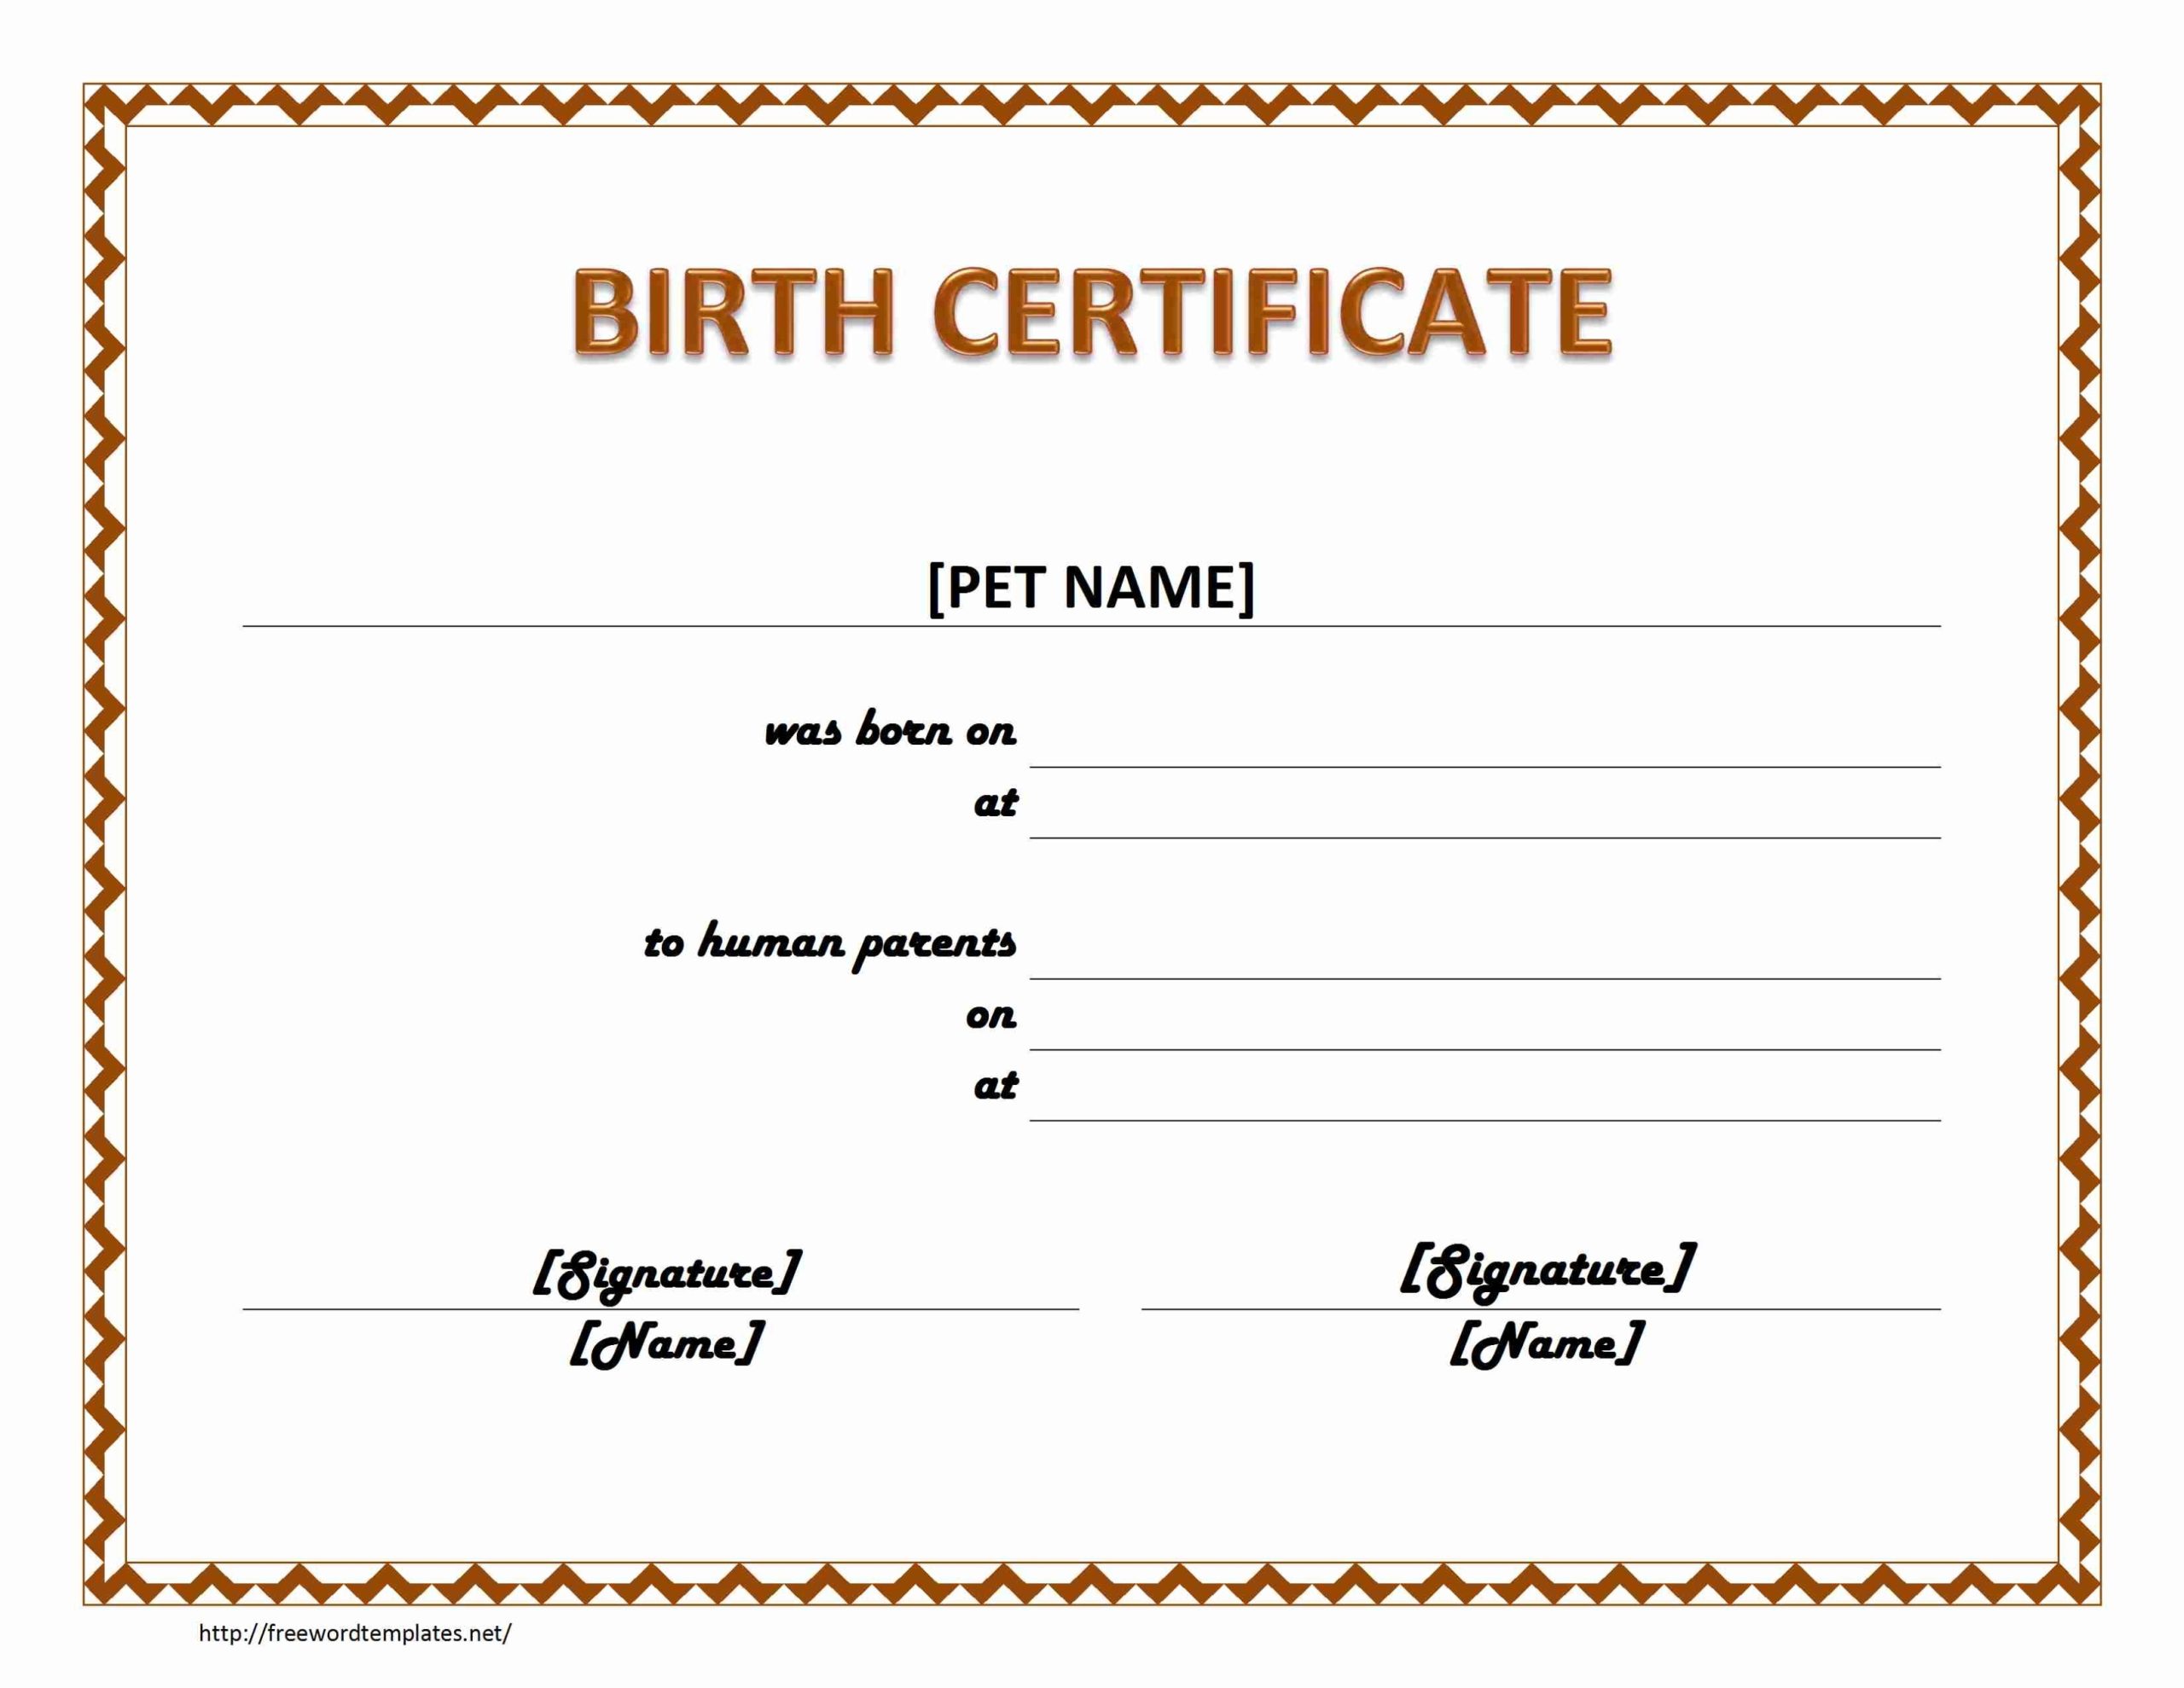 Pet Fish Birth Certificate - Pet Birth Certificate | Word Templates | Free Word Templates | Ms With Regard To Birth Certificate Templates For Word